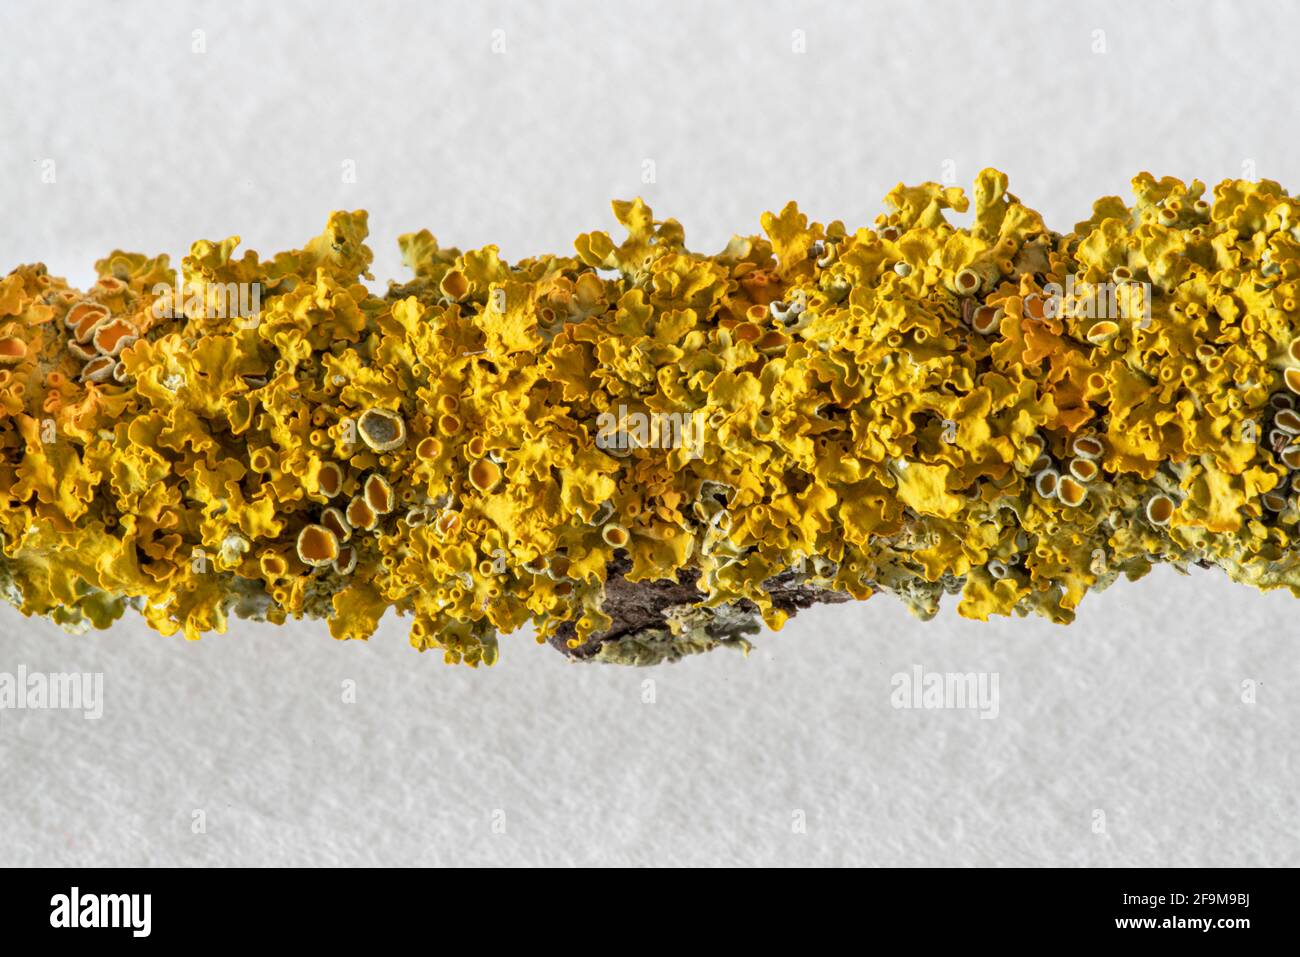 close-up of yellow lichen on a tree branch Stock Photo